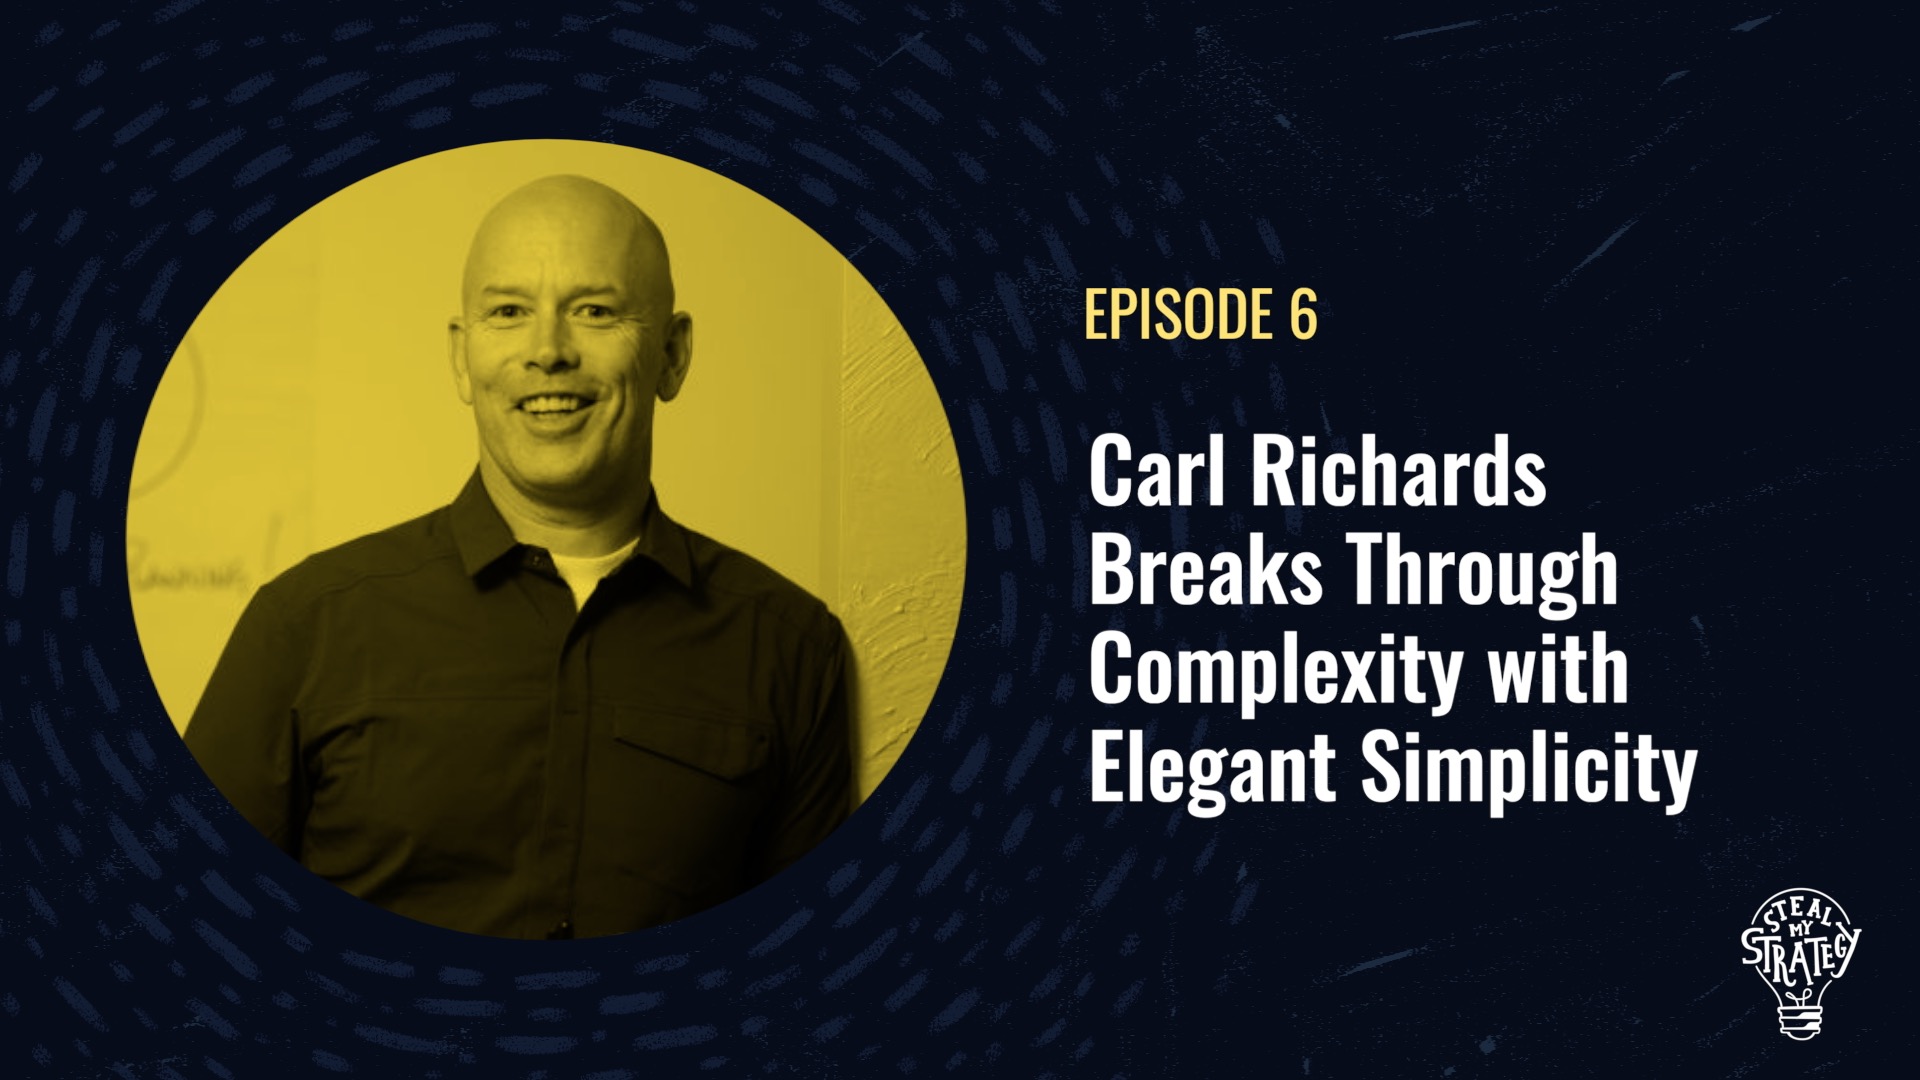 Carl Richards Breaks Through Complexity with Elegant Simplicity